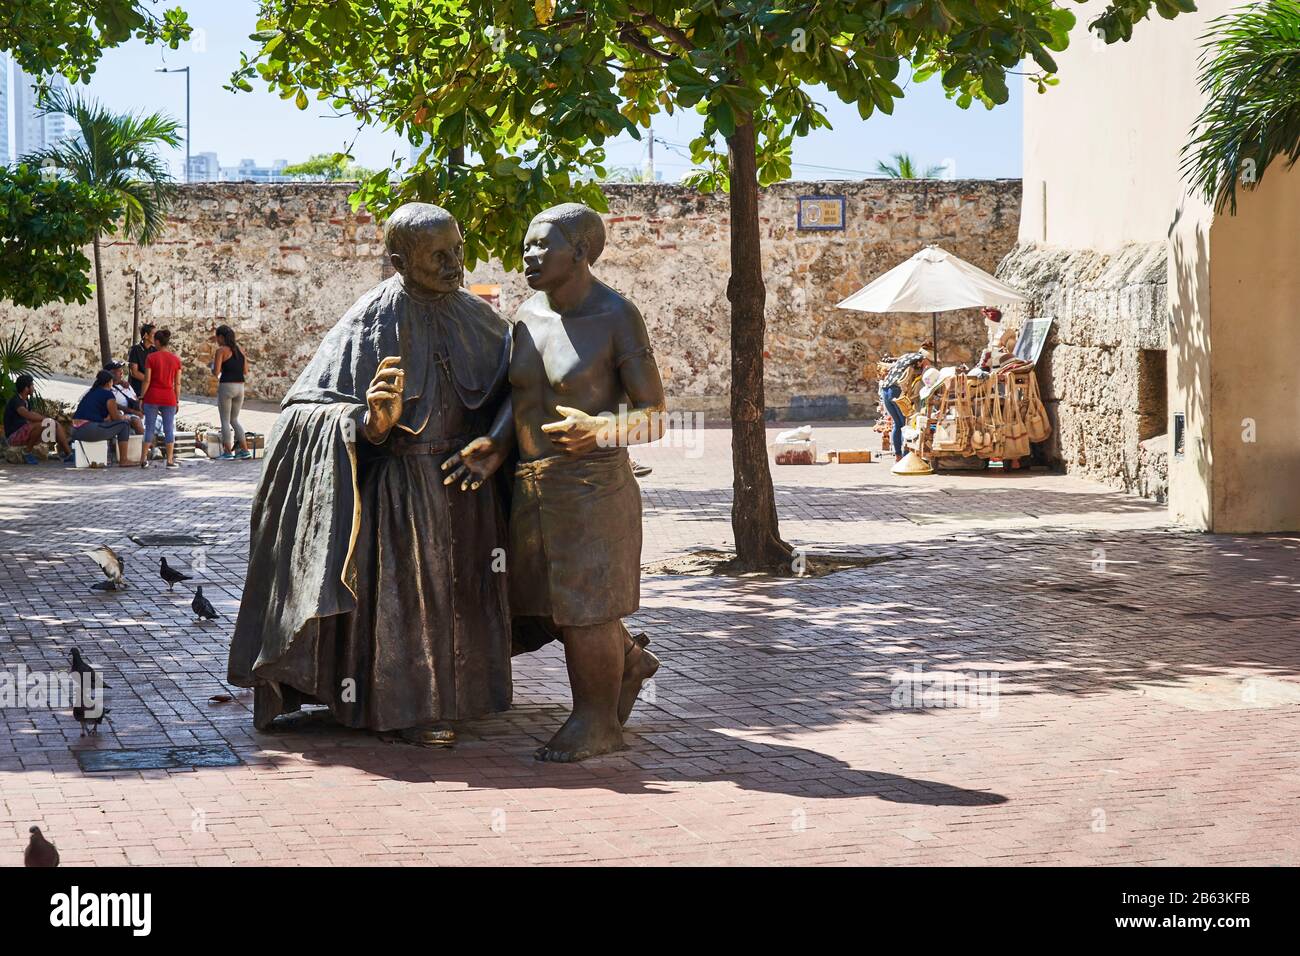 Statue of Saint Peter Claver in Cartagena, Colombia Stock Photo